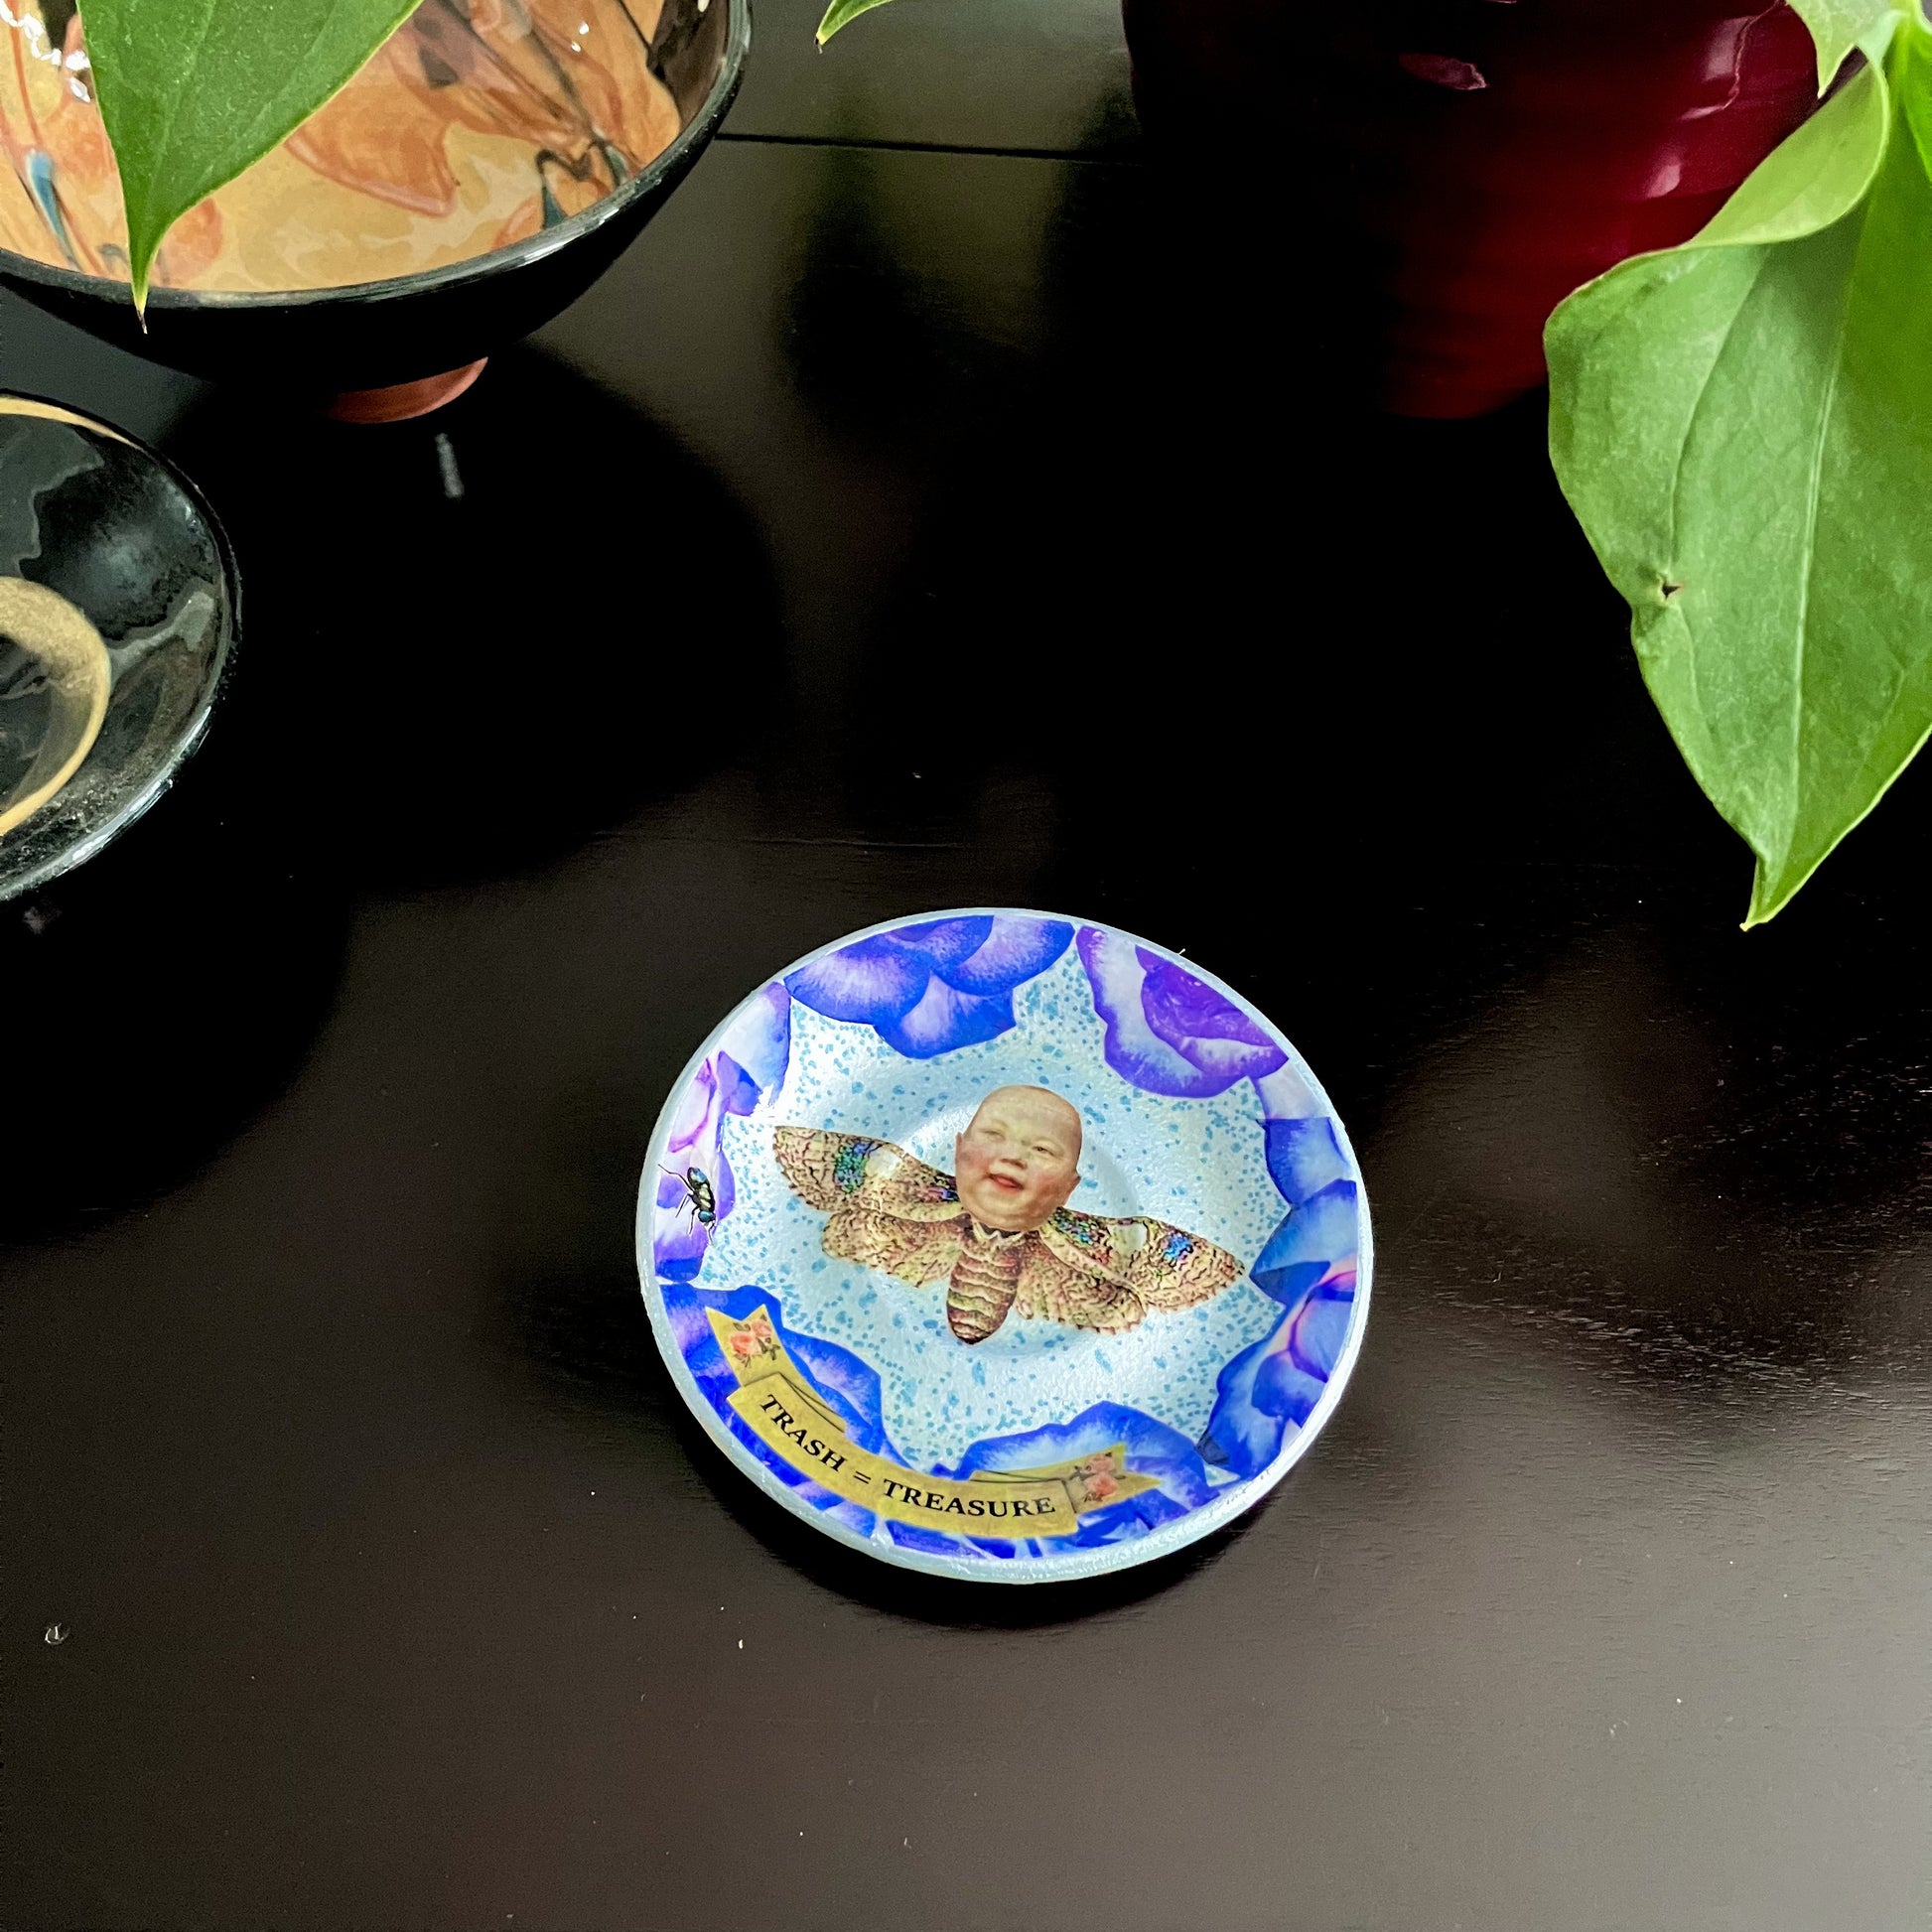 "Trash = Treasure" Trinket Dish by House of Frisson. Featuring a collage of a moth with a doll head, framed with blue roses. Showing dish on a coffee table.